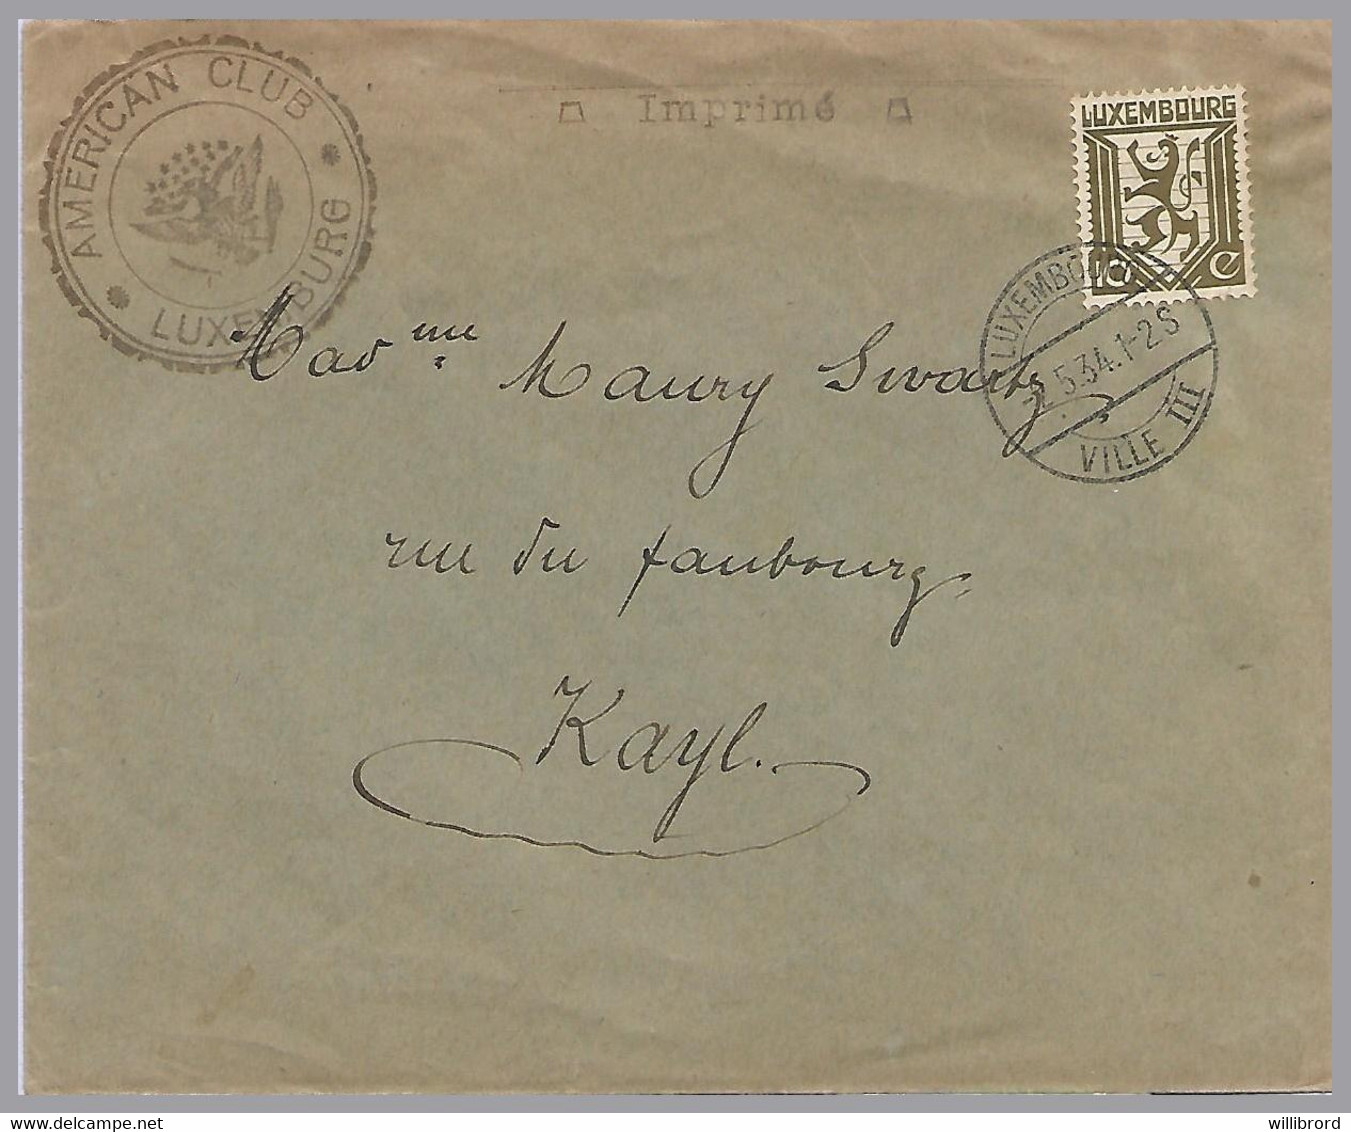 LUXEMBOURG - 10c Lion 1934 "American Club Luxemburg" T34 Imprime To Kayl - Covers & Documents